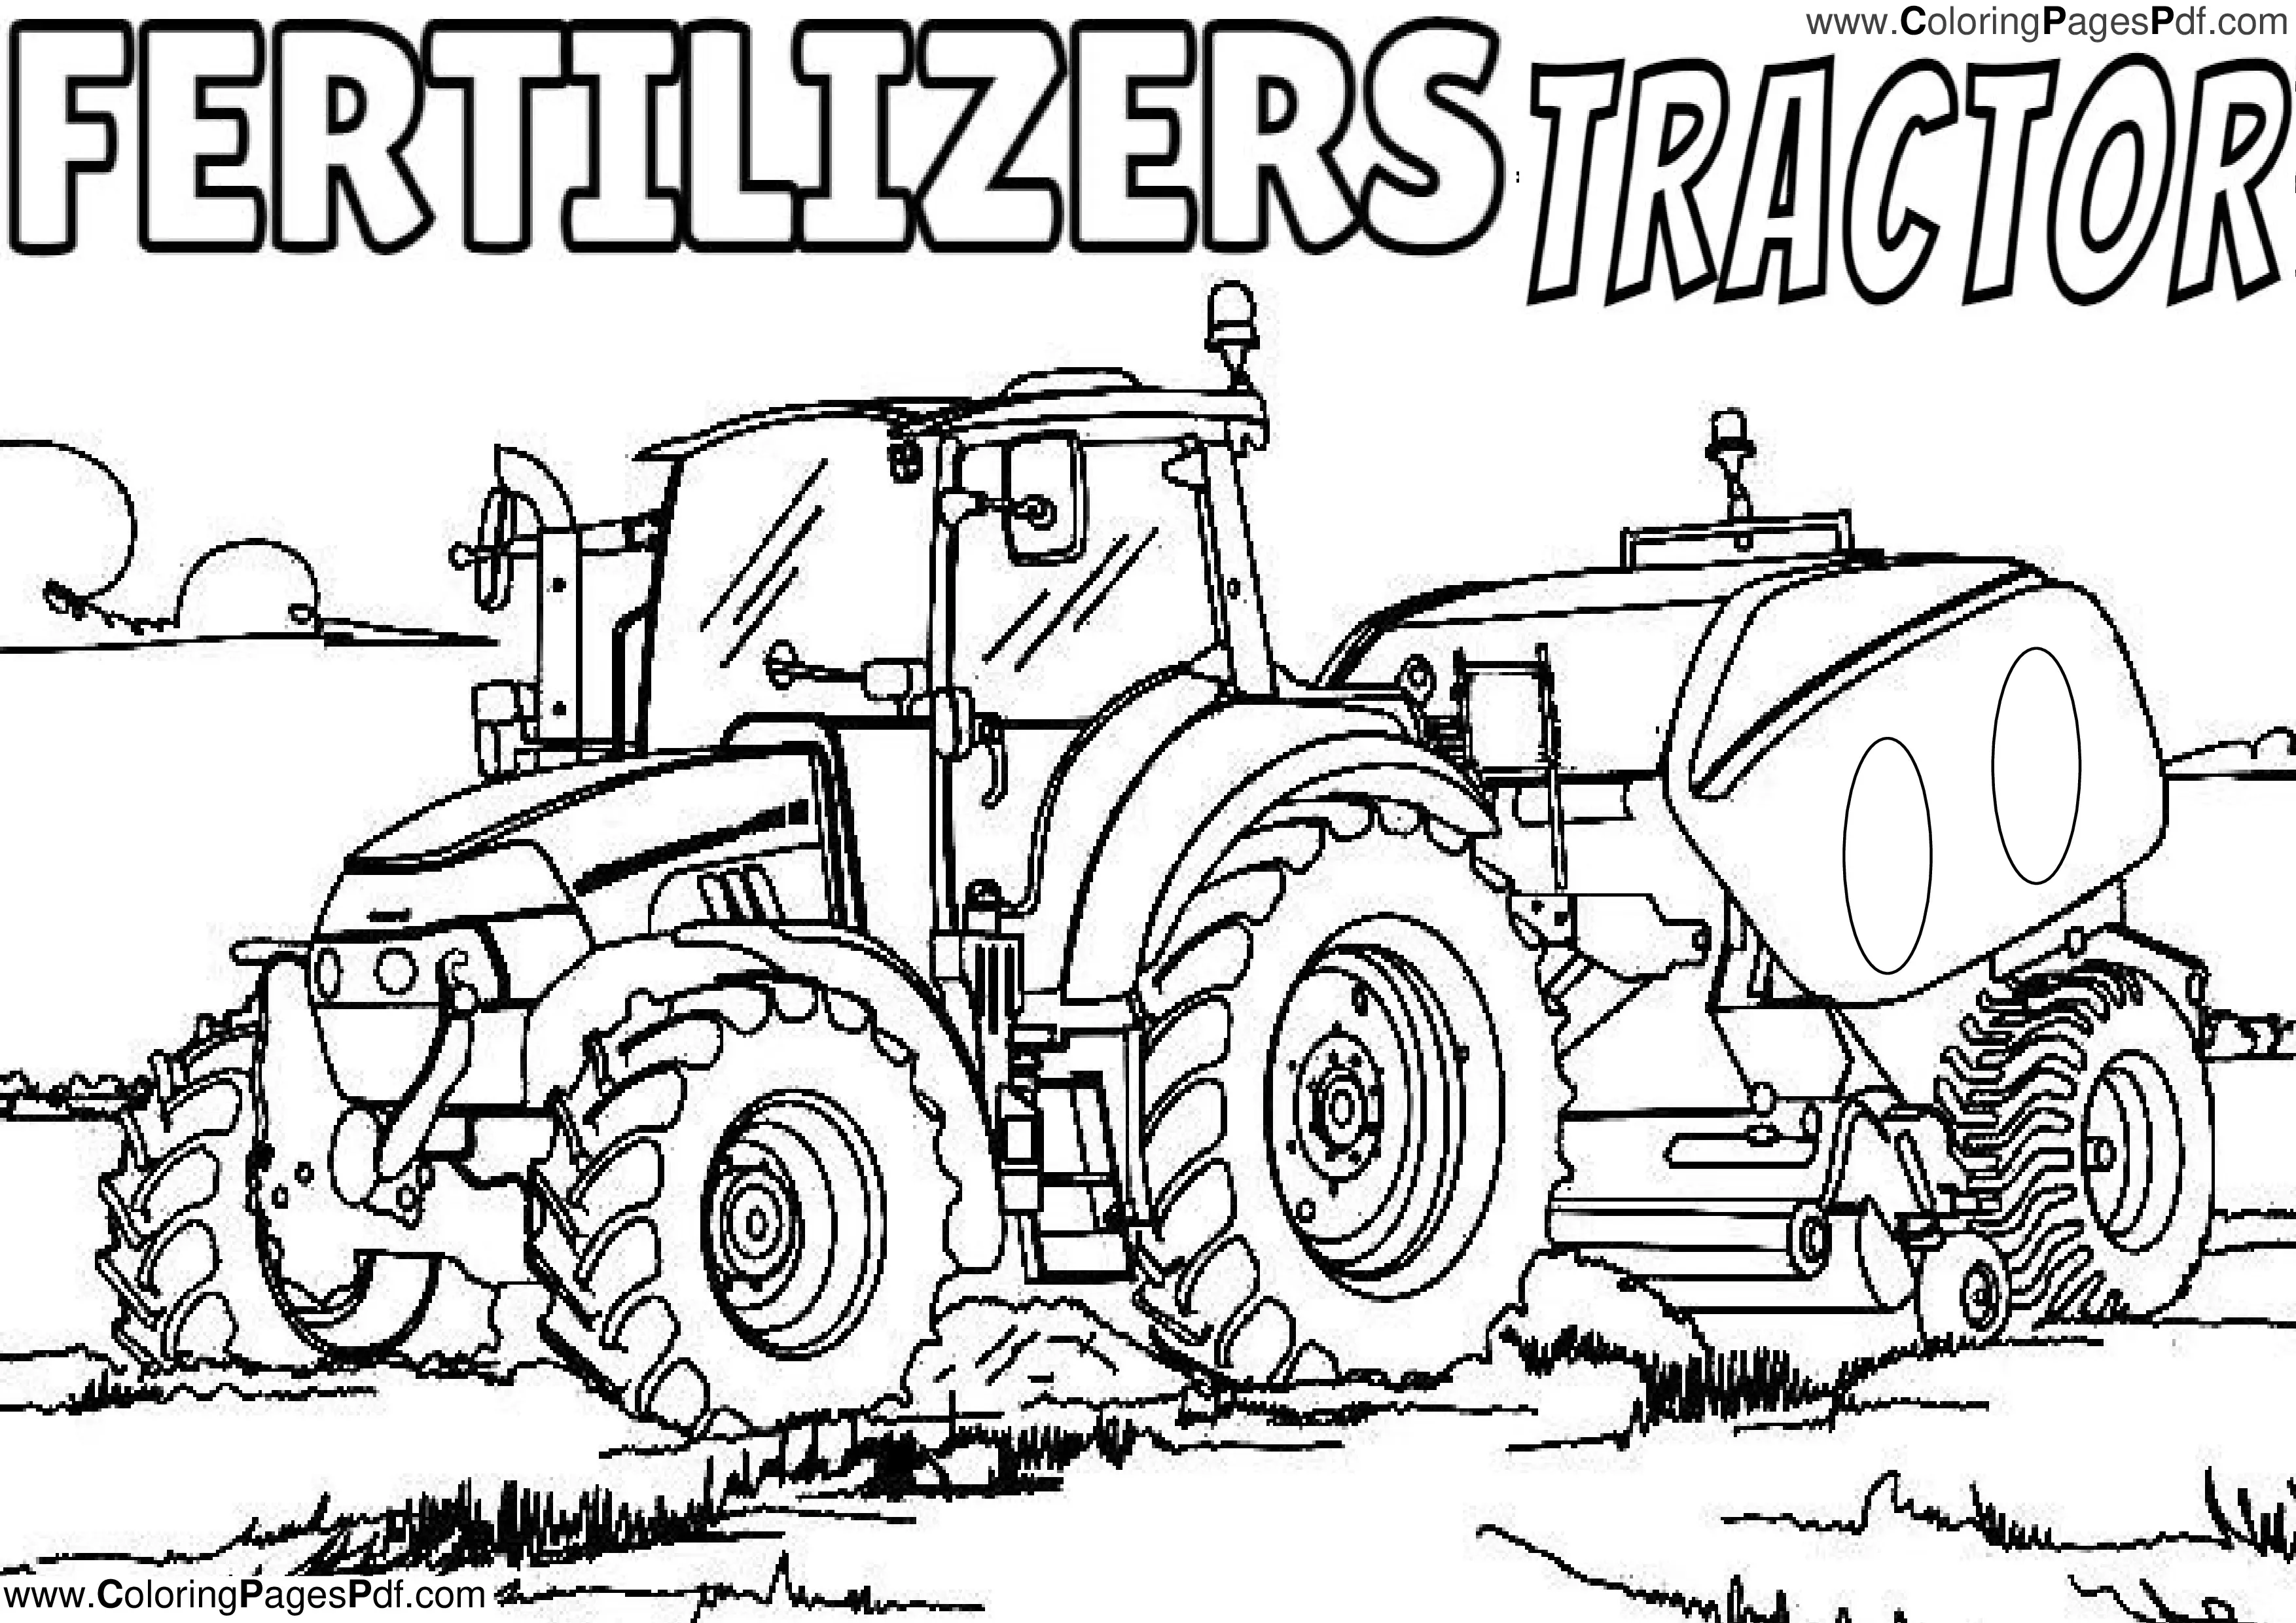 Tractor coloring page free